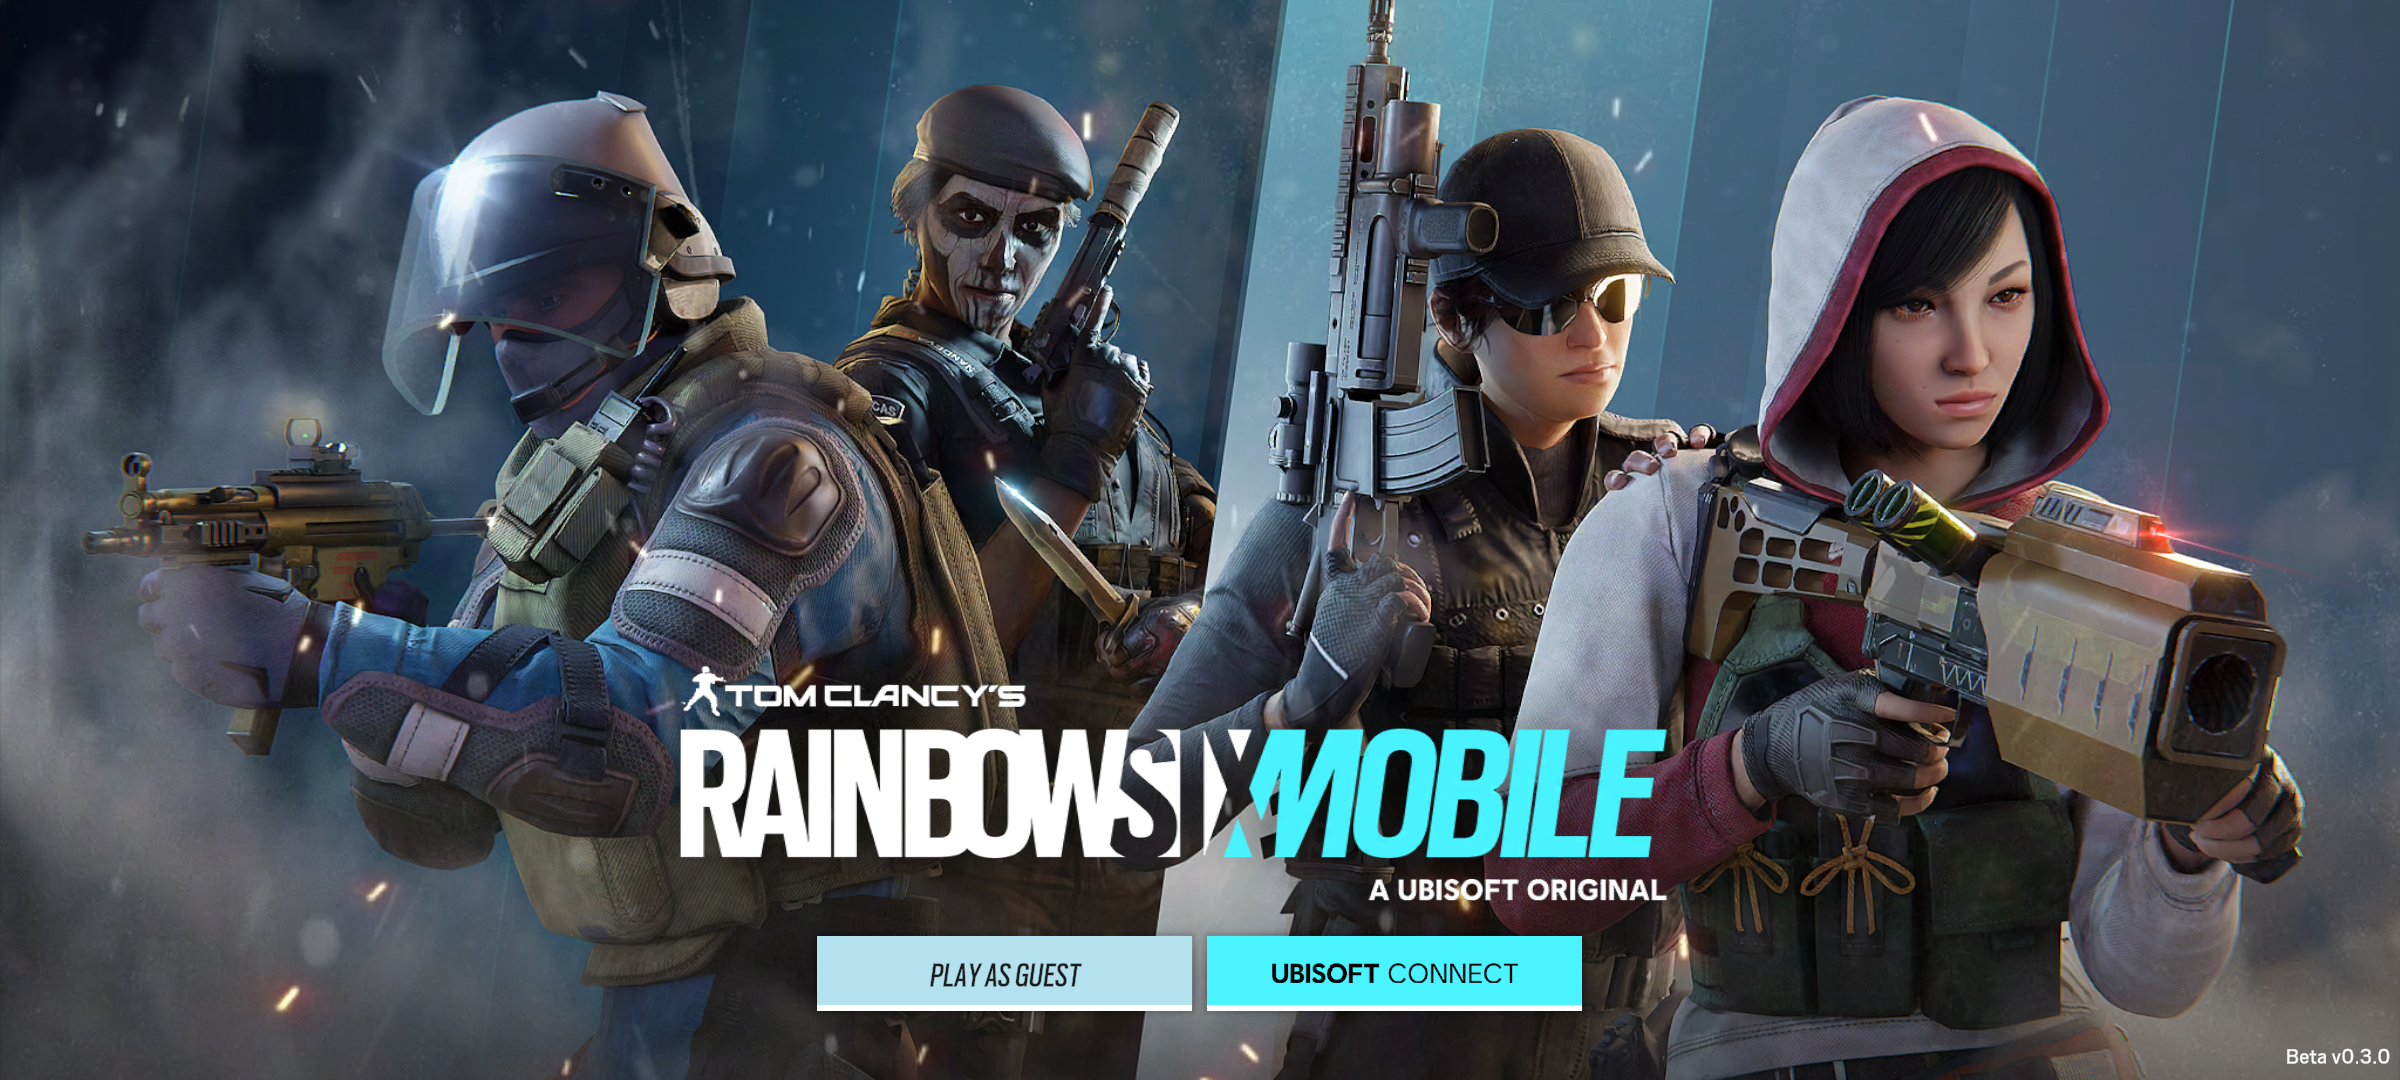 How to download and play Rainbow Six Mobile on TapTap with No Restrictions  - Rainbow Six Mobile - TapTap